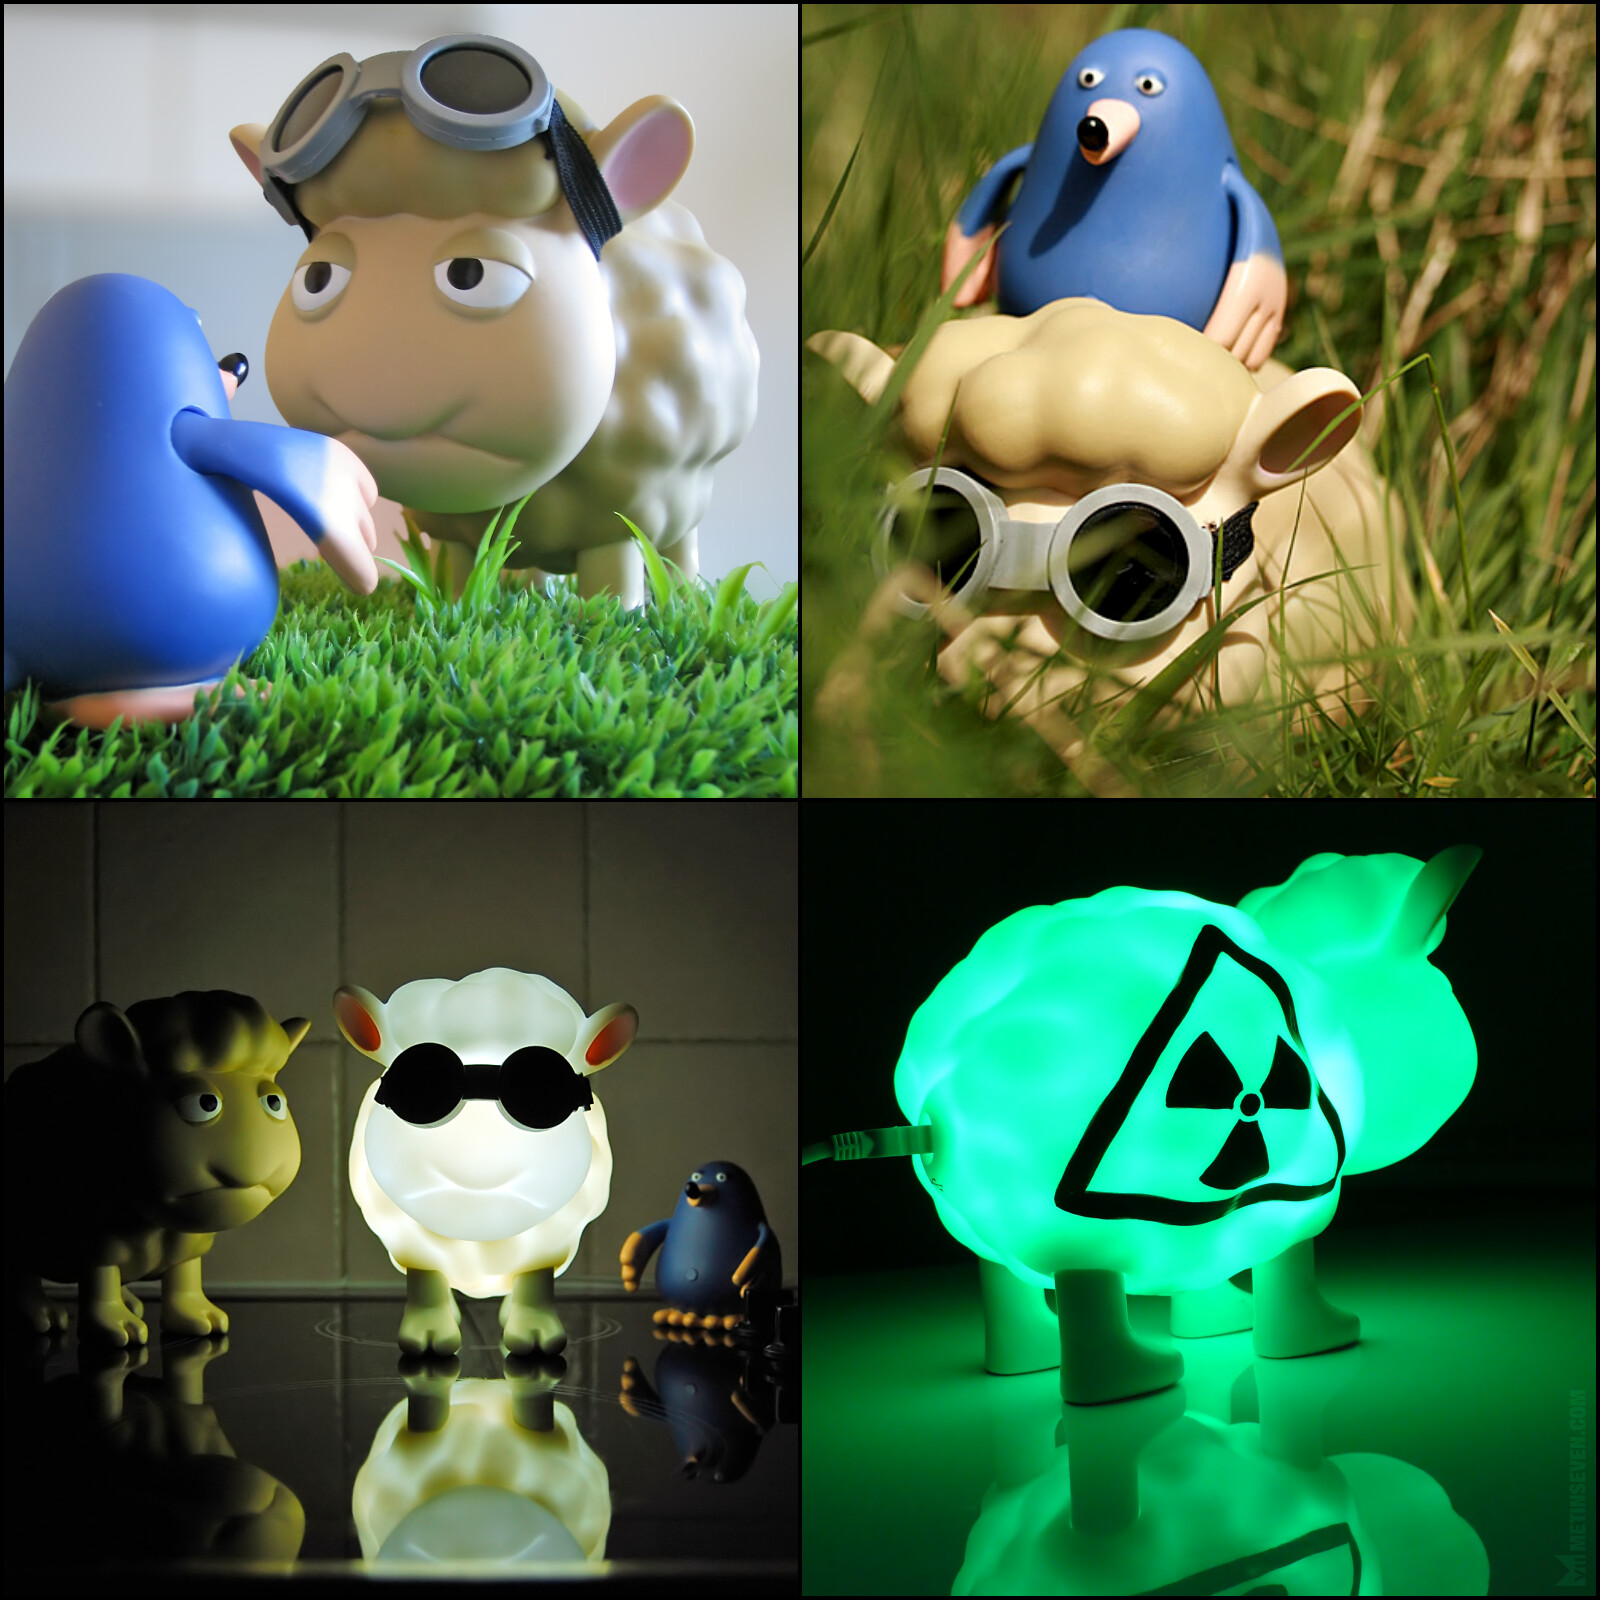 The Seamour Sheep and Marty Mole limited-edition vinyl toys and USB lamps, produced in Hong Kong by Crazy Label, and sold in designer toy stores around the world. ❤